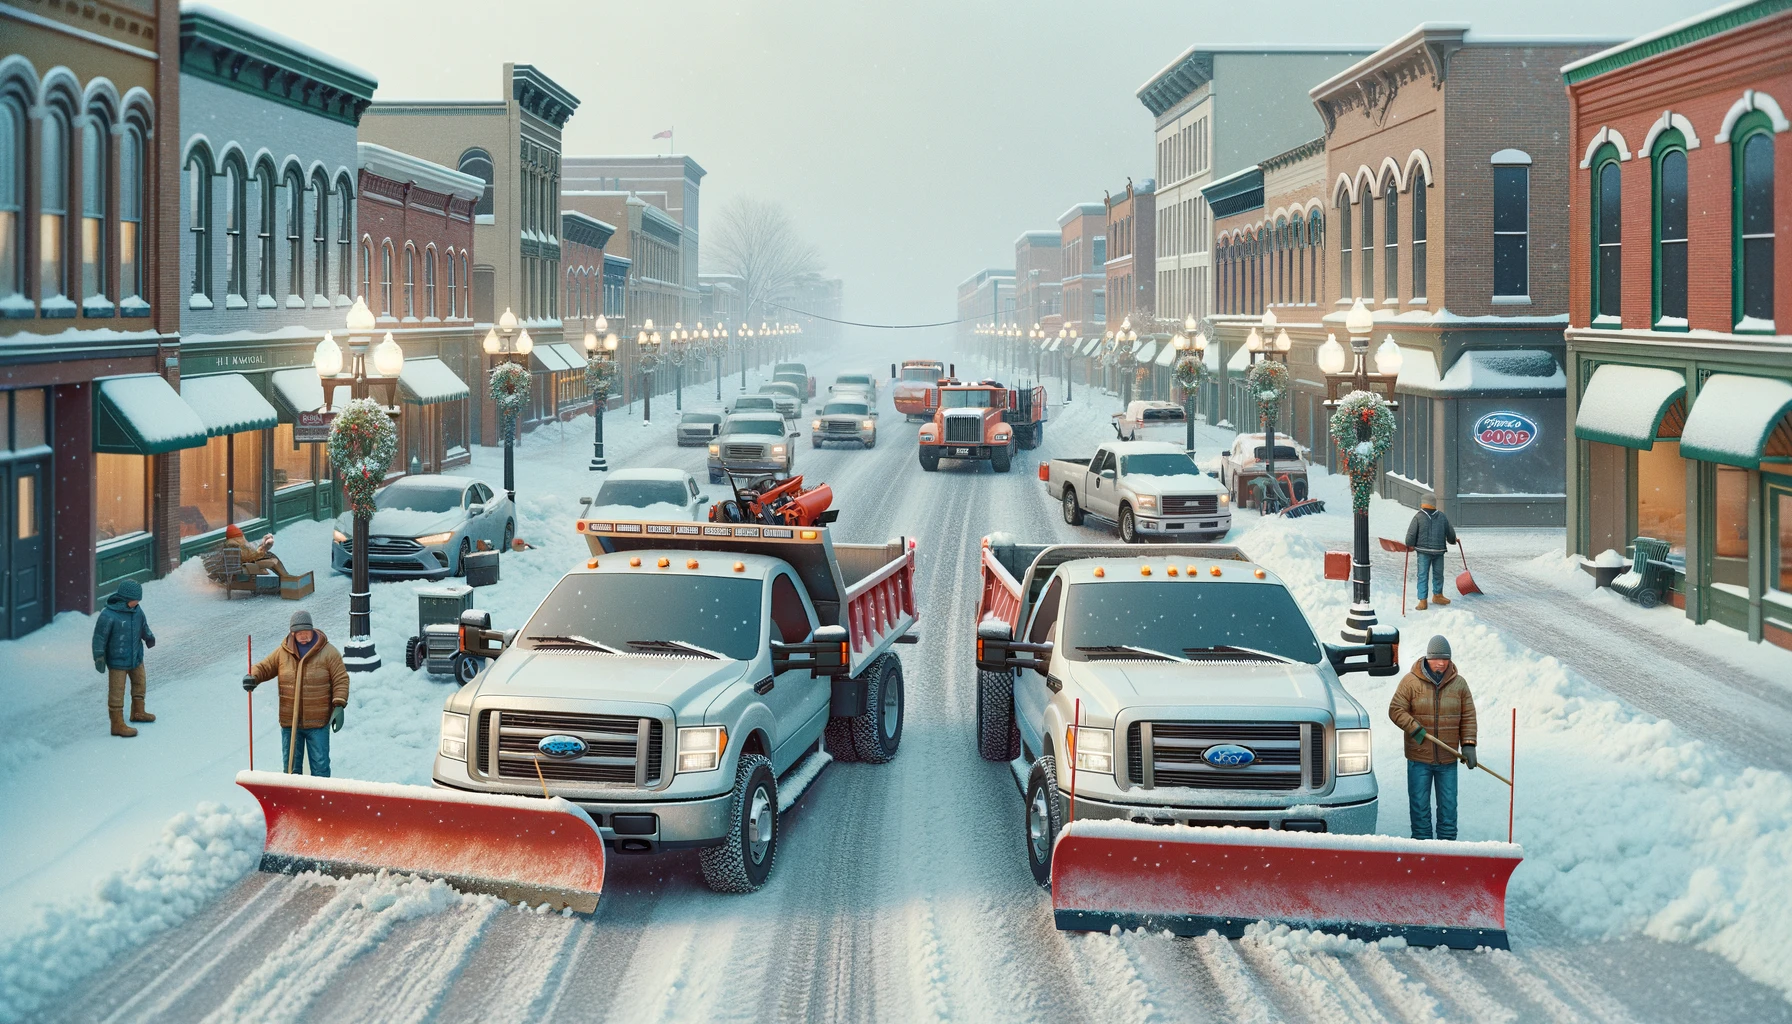 Winter Wonderland: Snow Removal Tips for Businesses